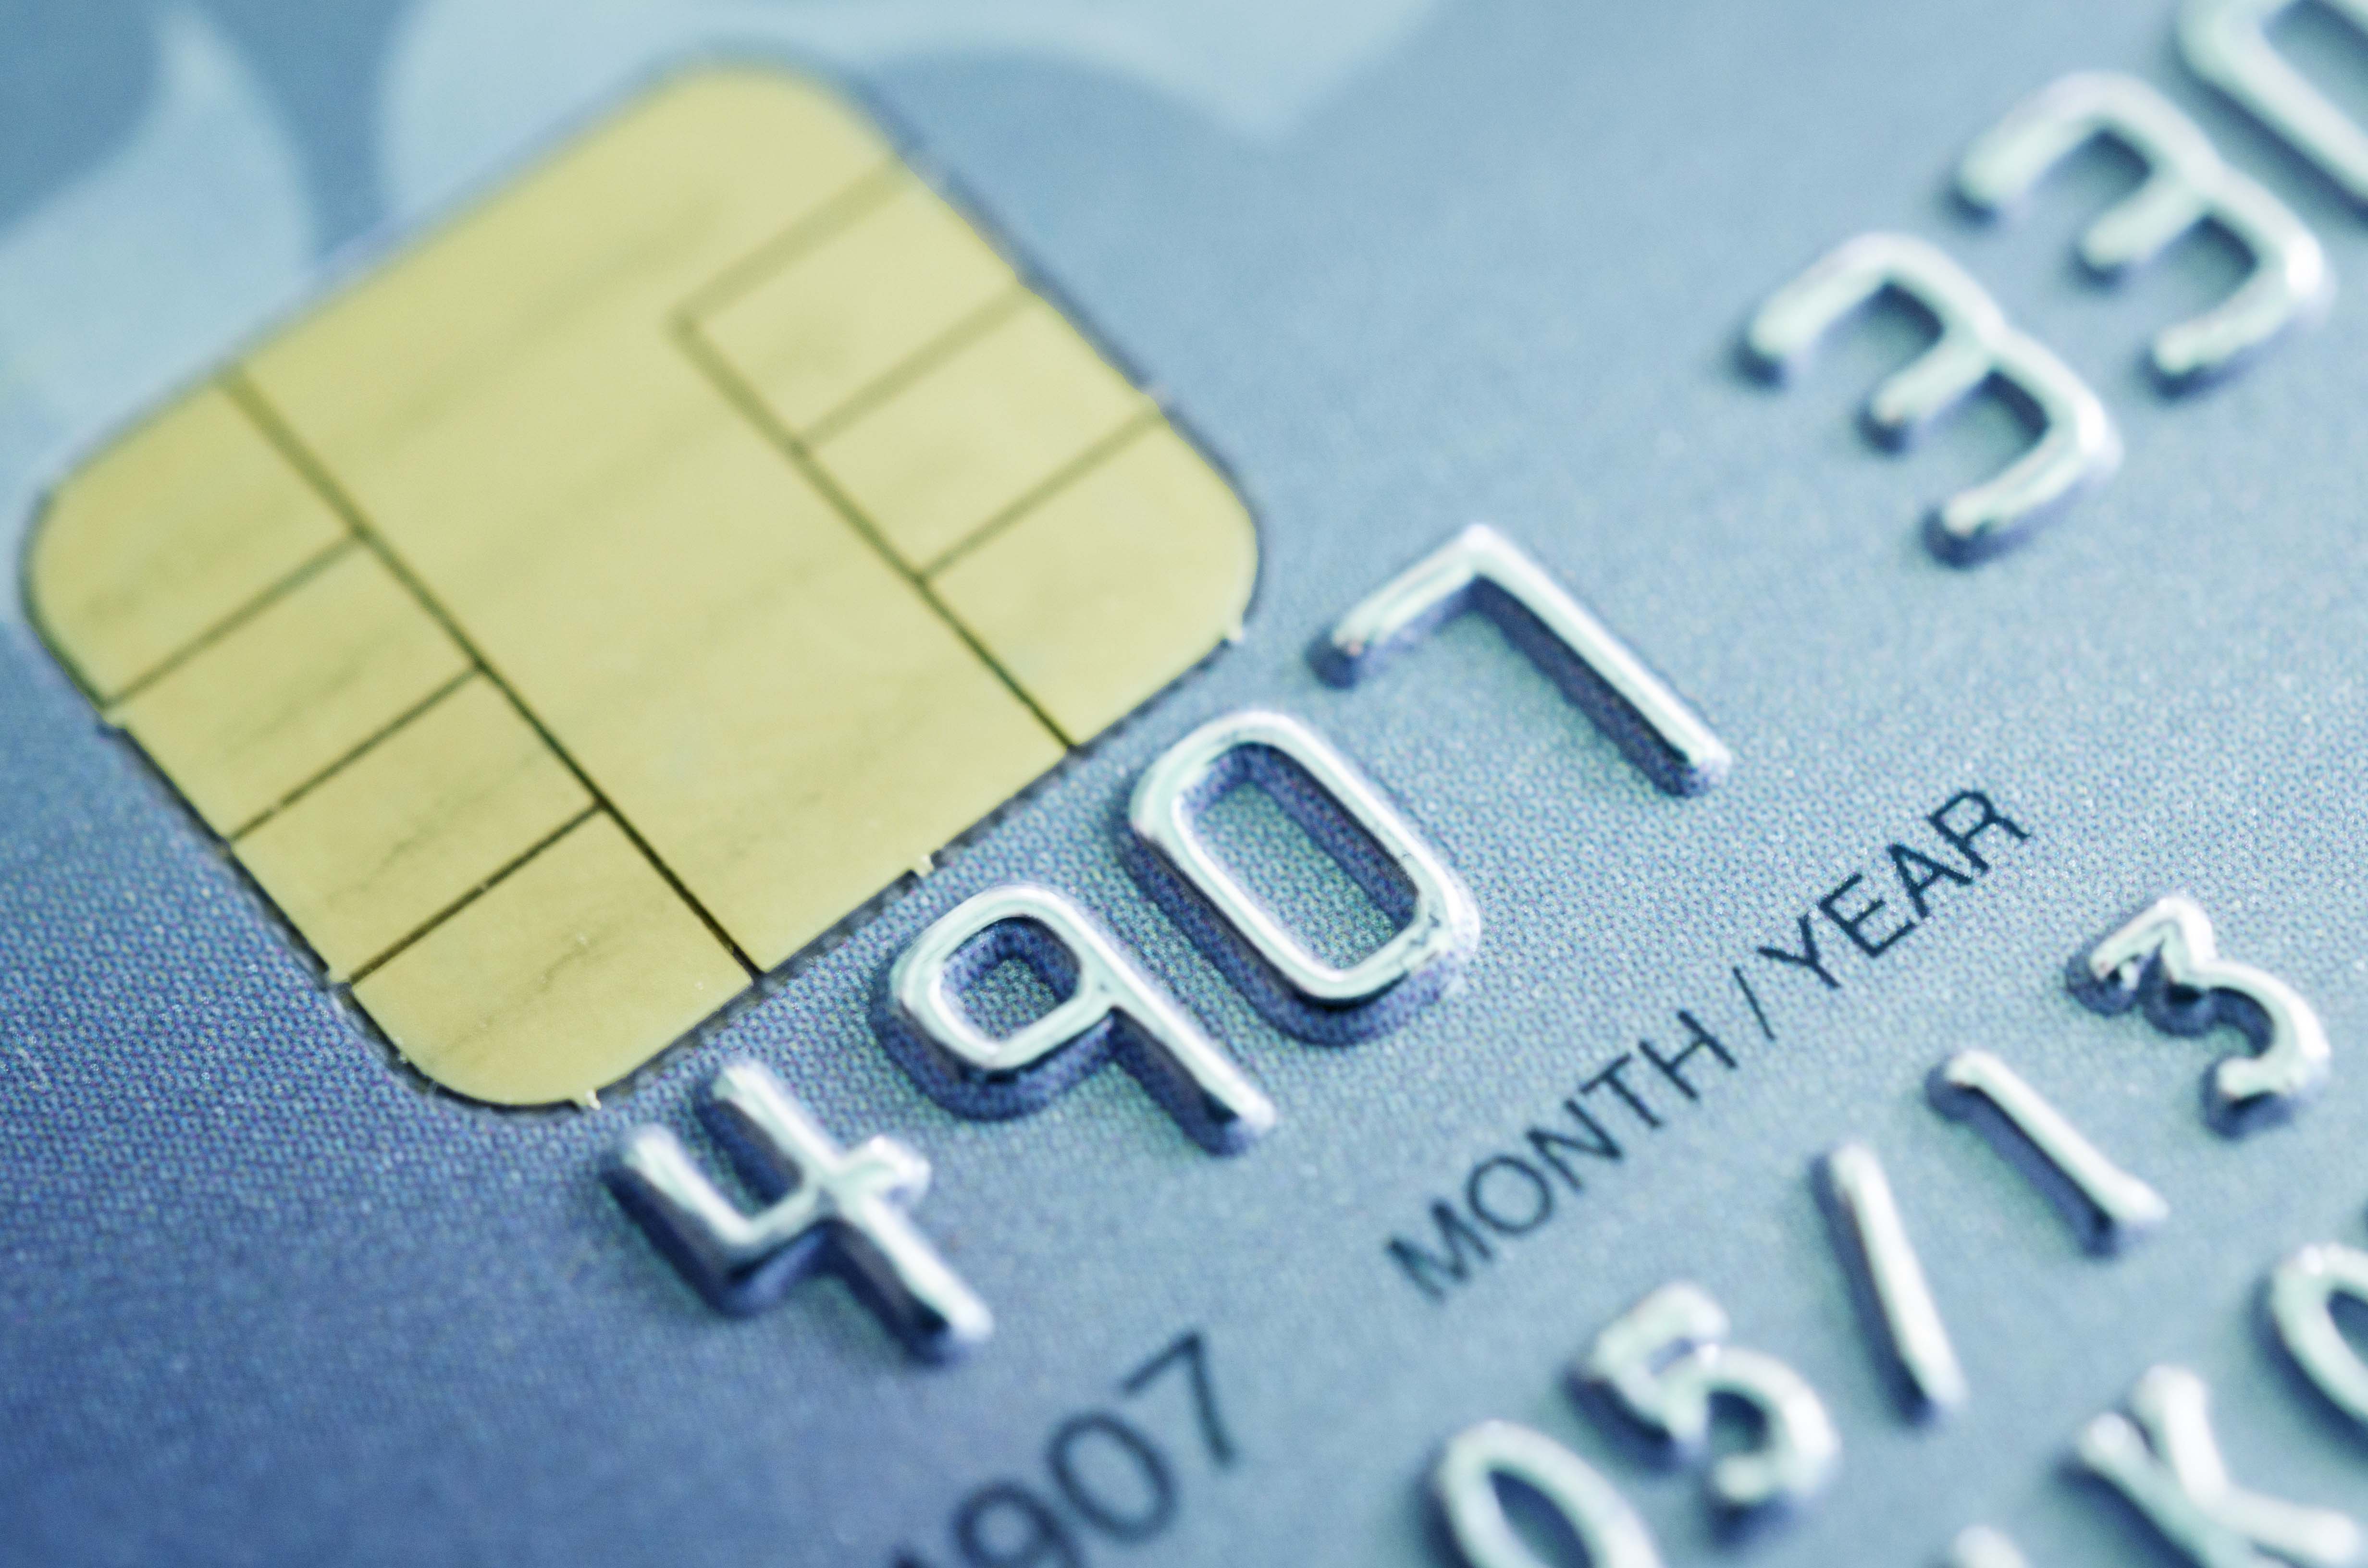 UK Cards Report: Repayments Not Impacted by Cost of Living Hike